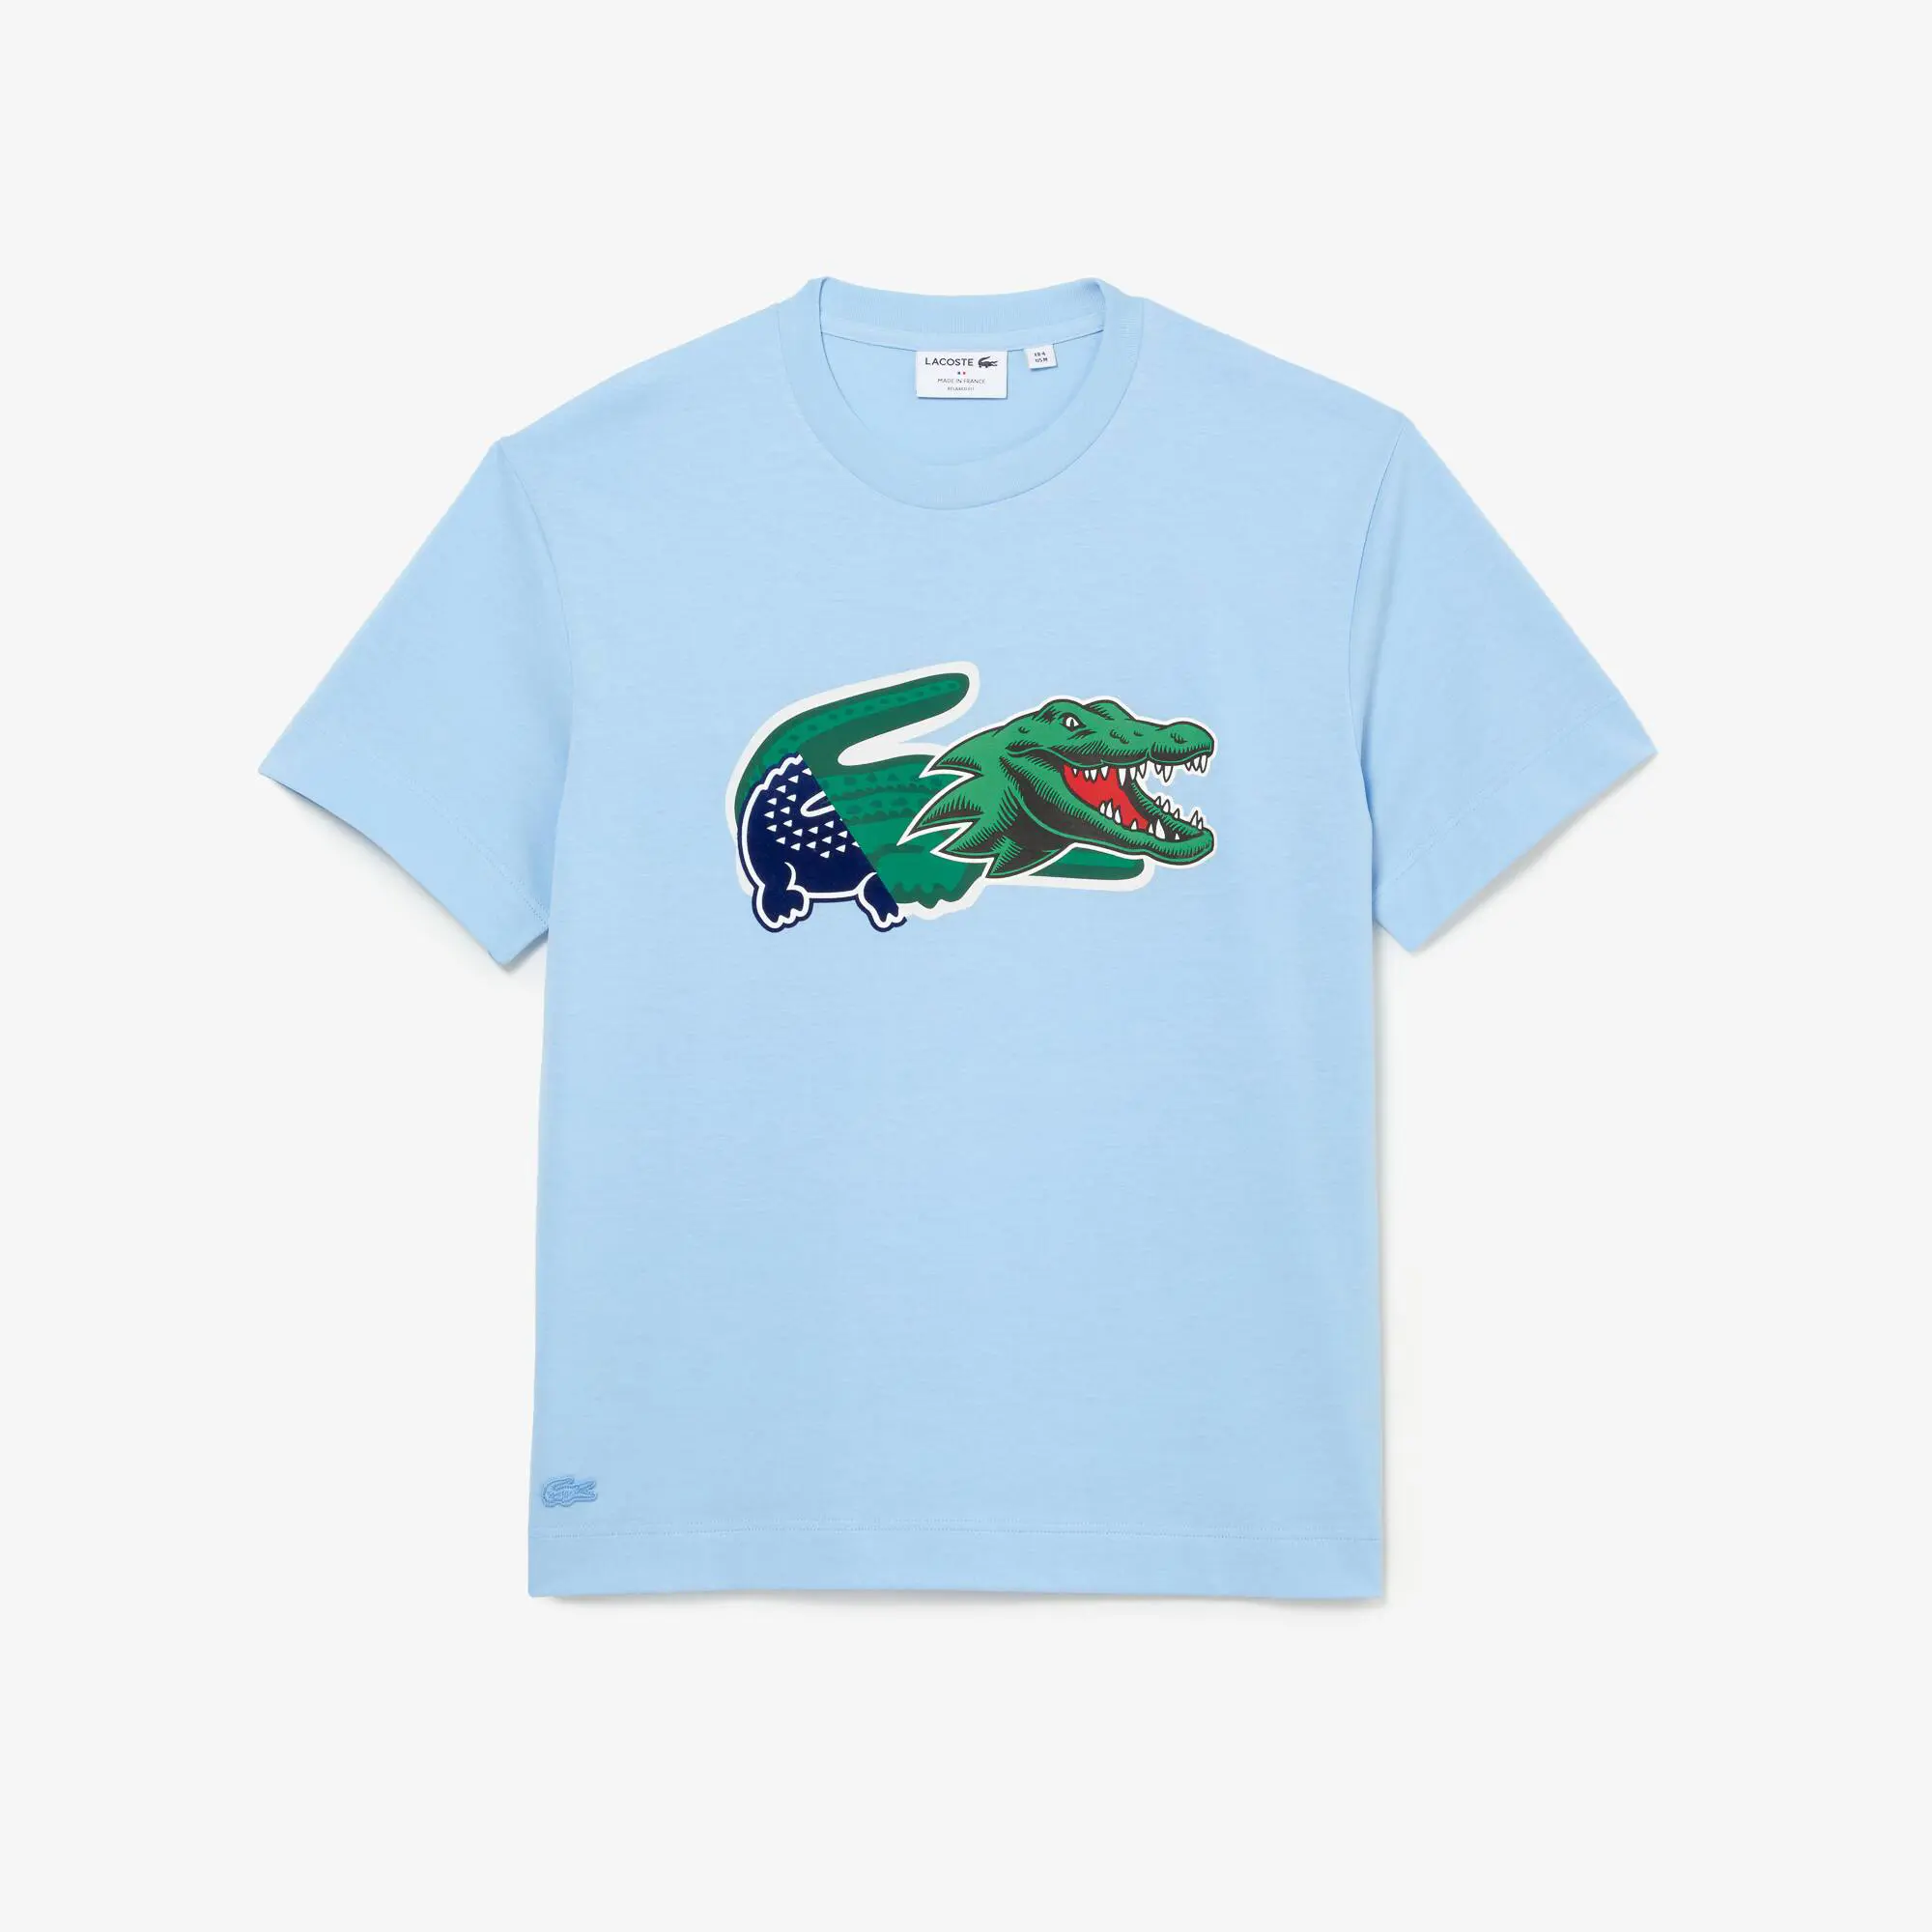 Lacoste Men's Holiday Relaxed Fit Oversized Crocodile T-Shirt. 2